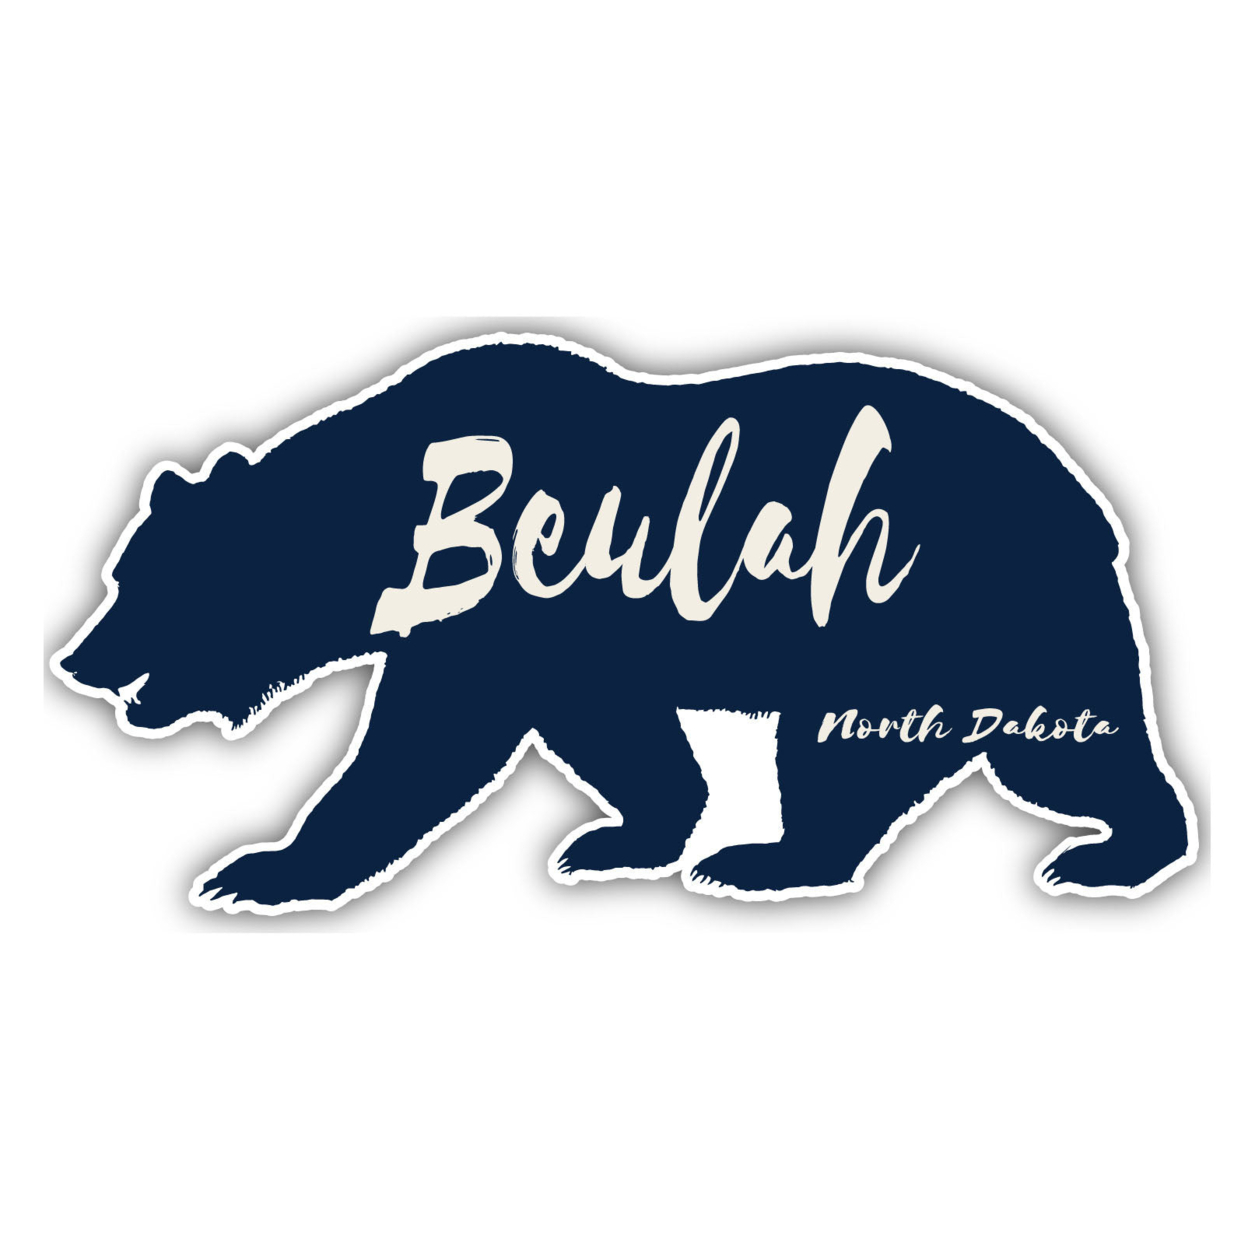 Beulah North Dakota Souvenir Decorative Stickers (Choose Theme And Size) - 4-Pack, 8-Inch, Great Outdoors